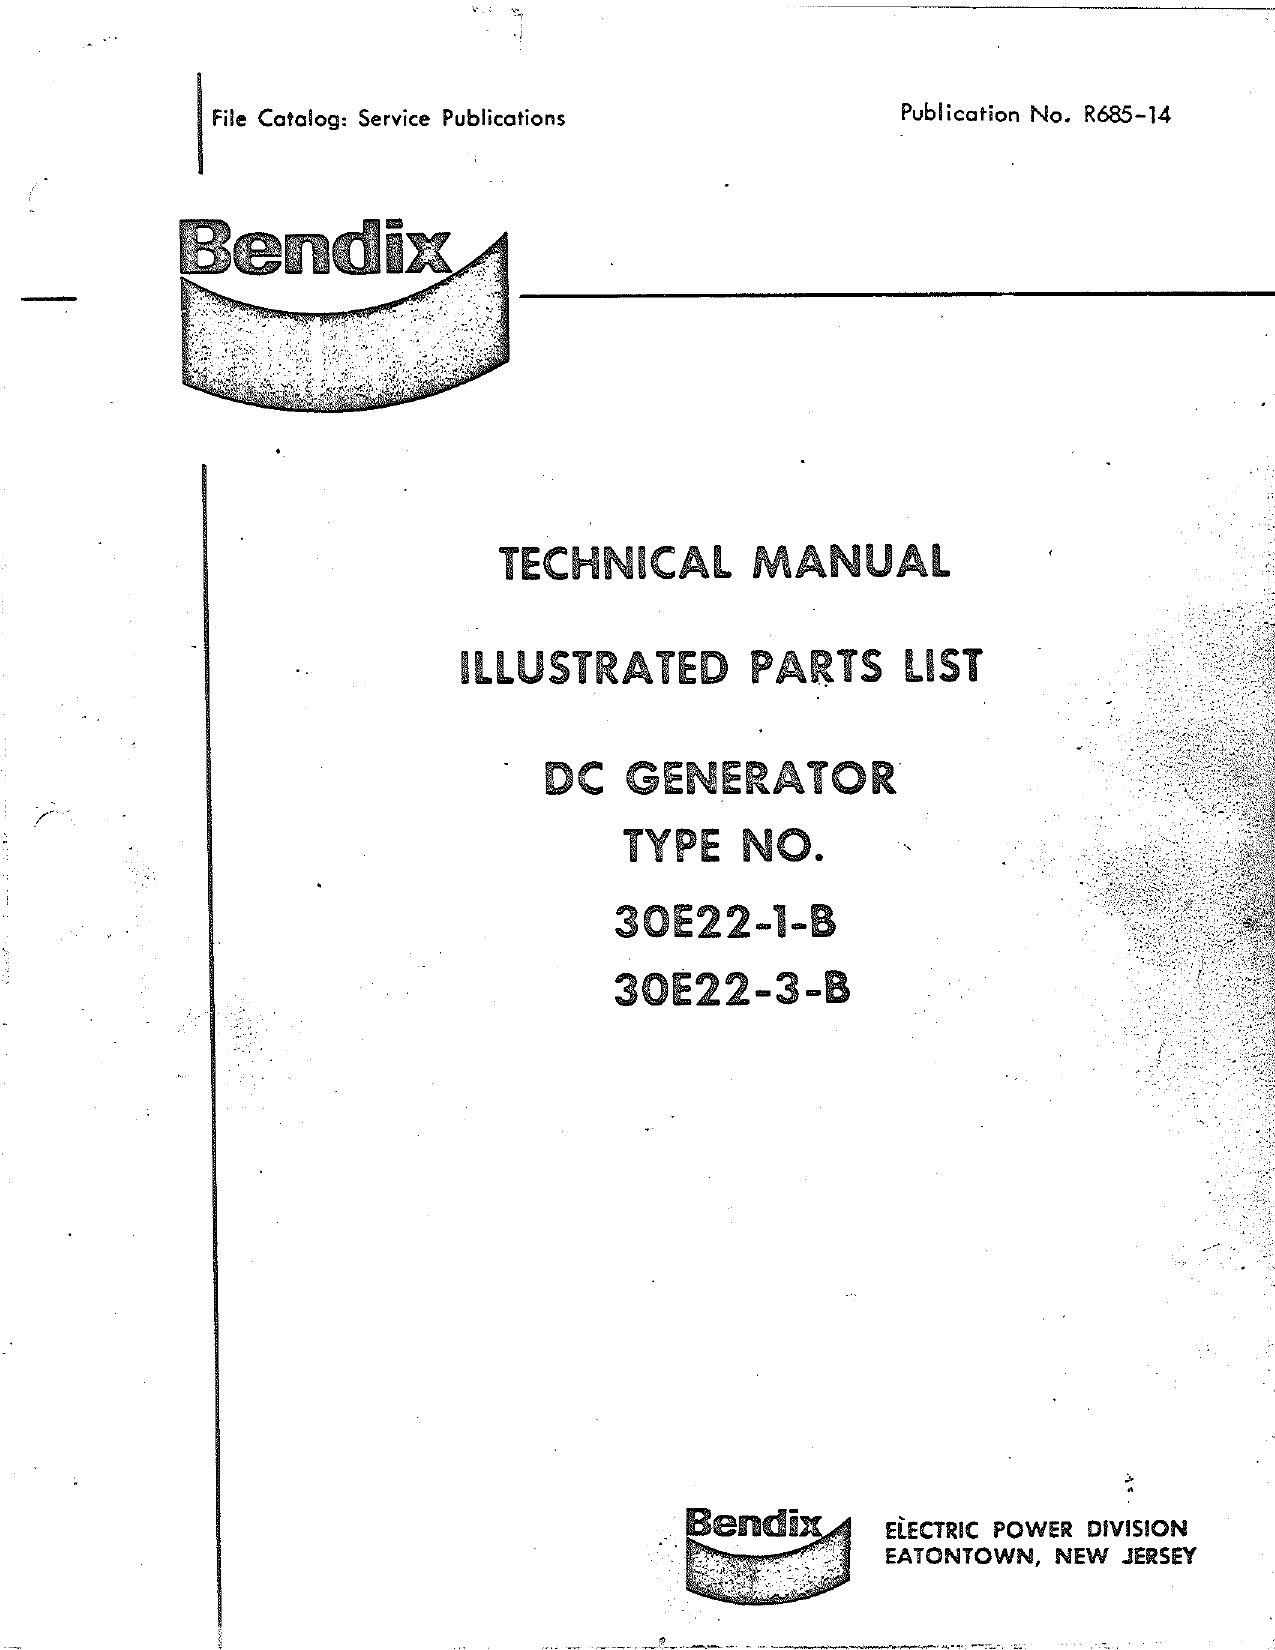 Sample page 1 from AirCorps Library document: Illustrated Parts List for DC Generator - Types 30E22-1-B, 30E22-3-B 